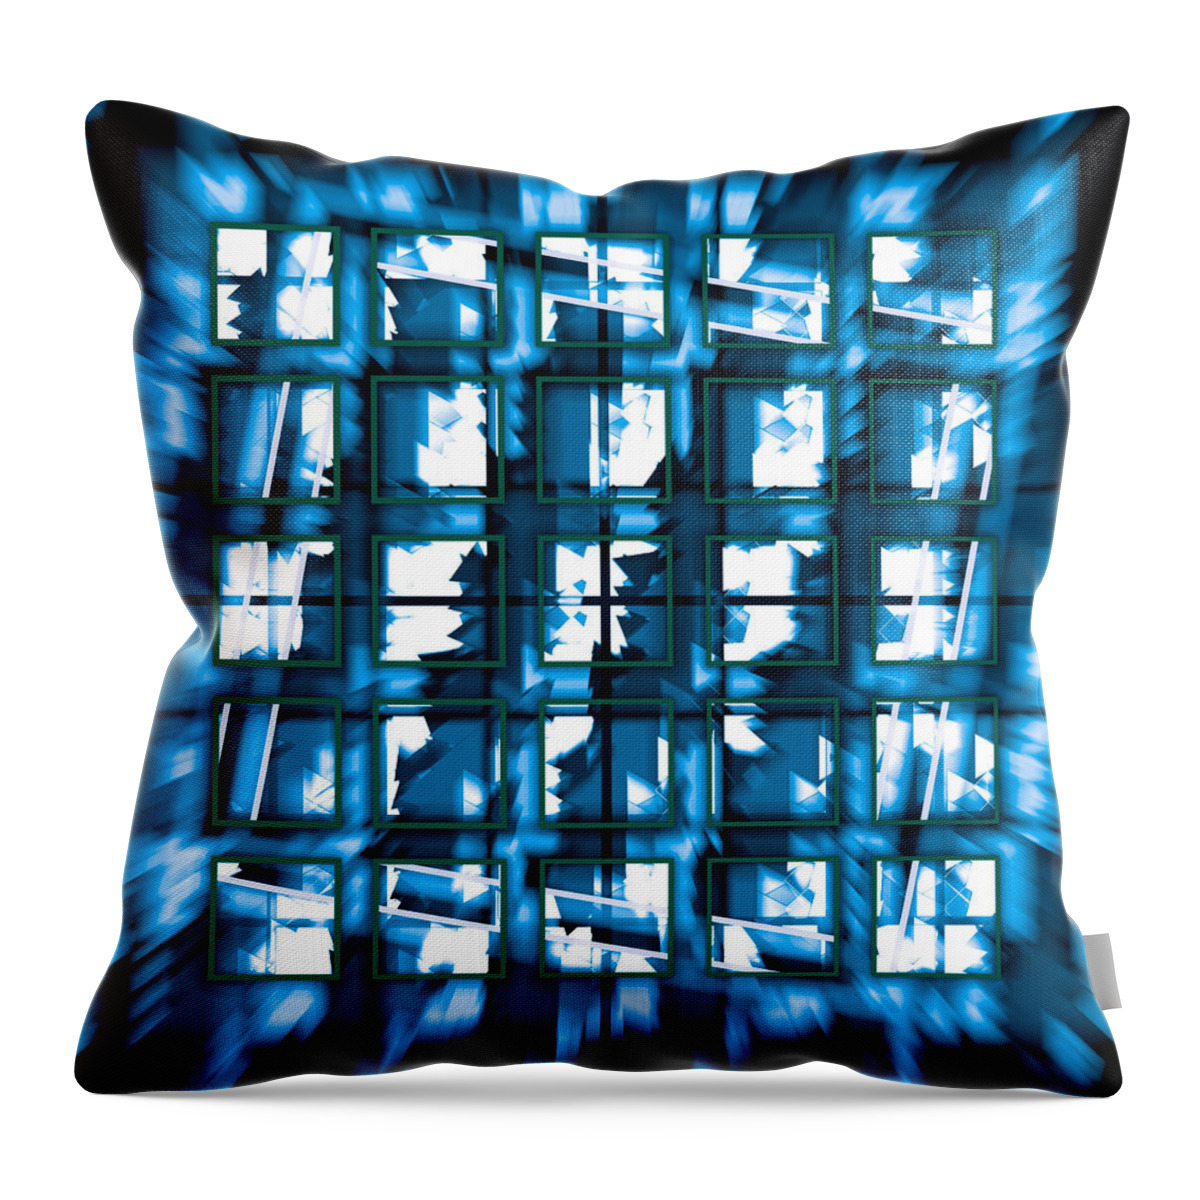 Abstract Throw Pillow featuring the digital art Pattern 53 by Marko Sabotin